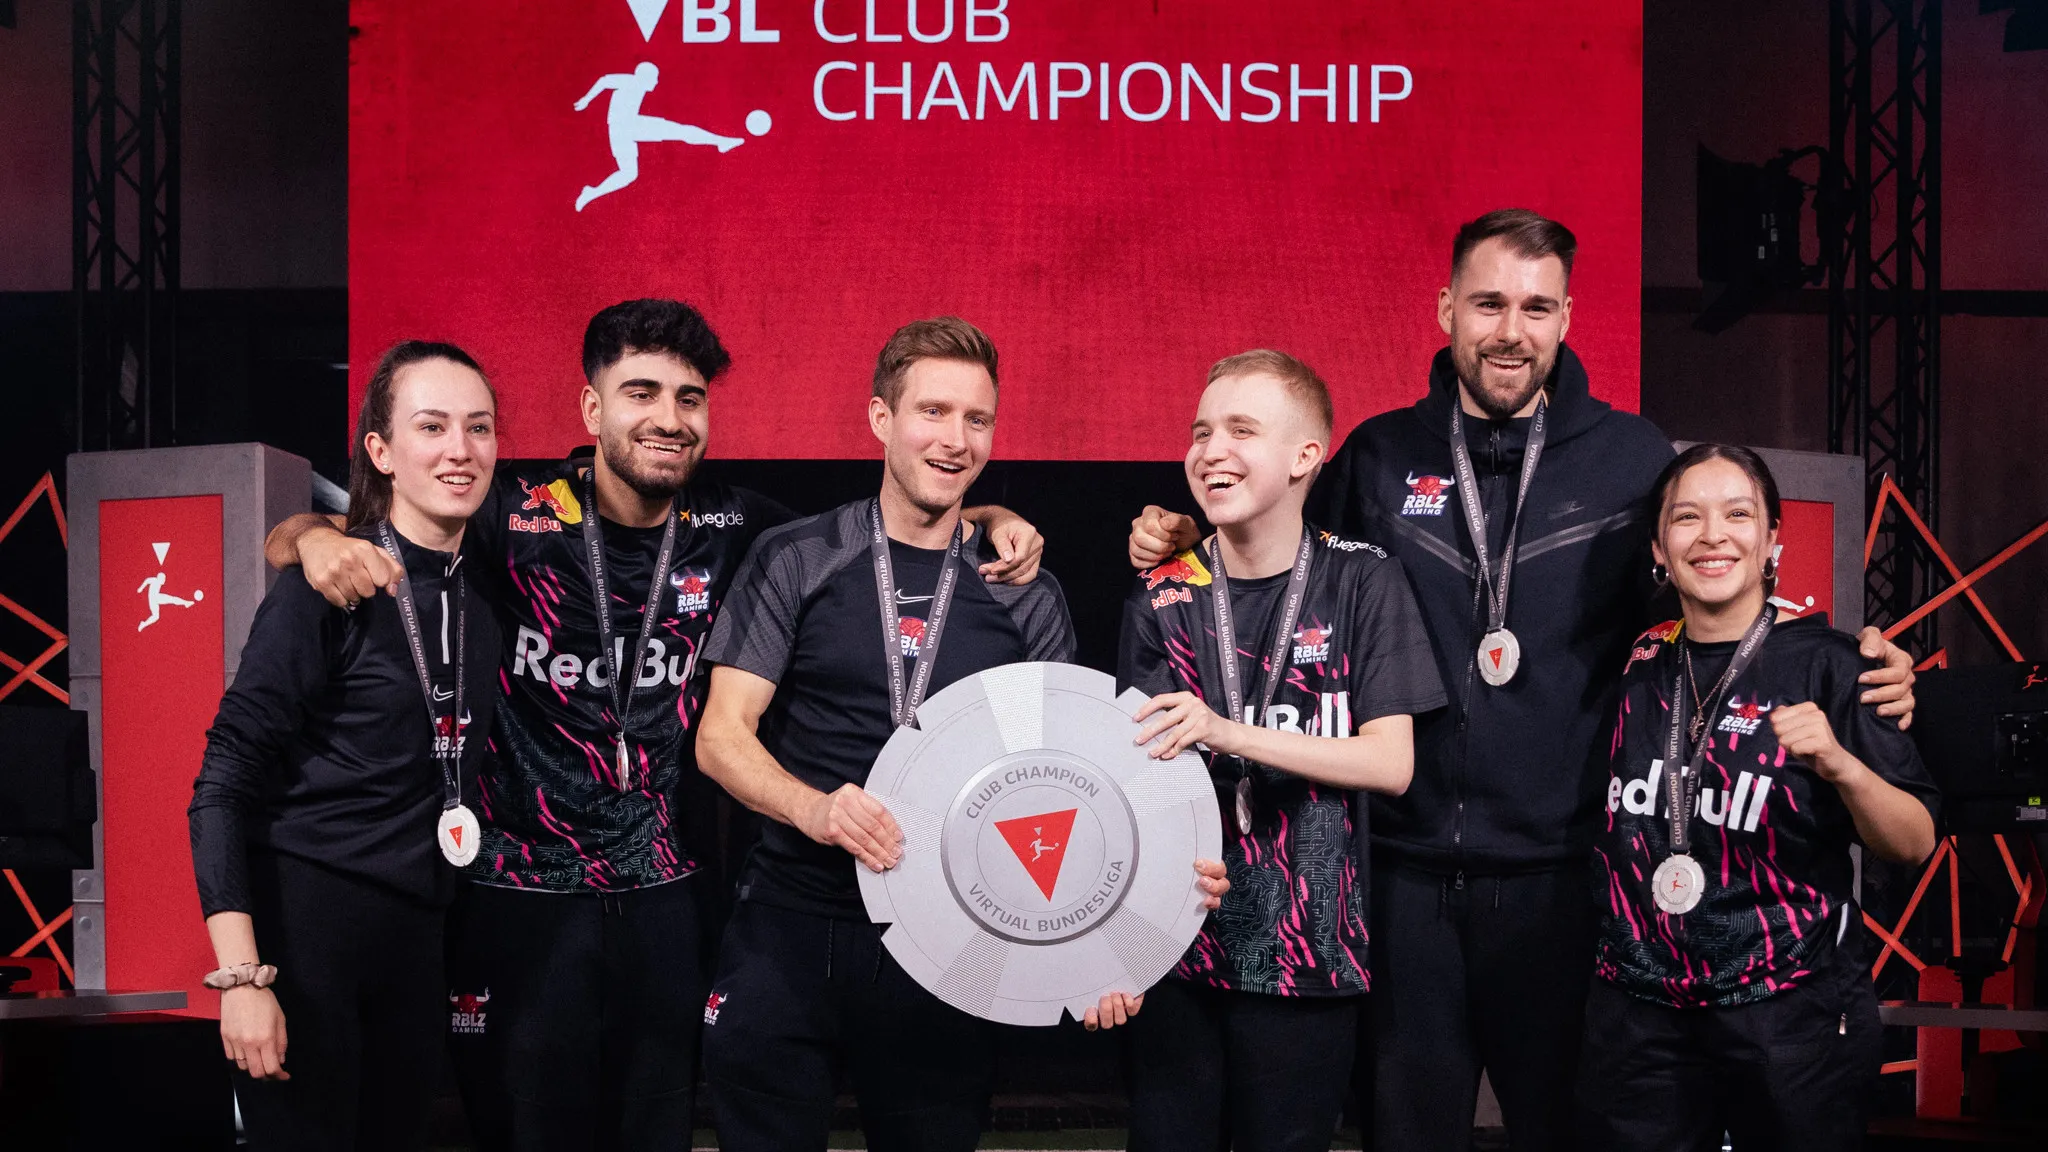 Anders Vejrgang, Umut Gültekin and Richard Hormes successfully defended the VBL title at the final in Cologne